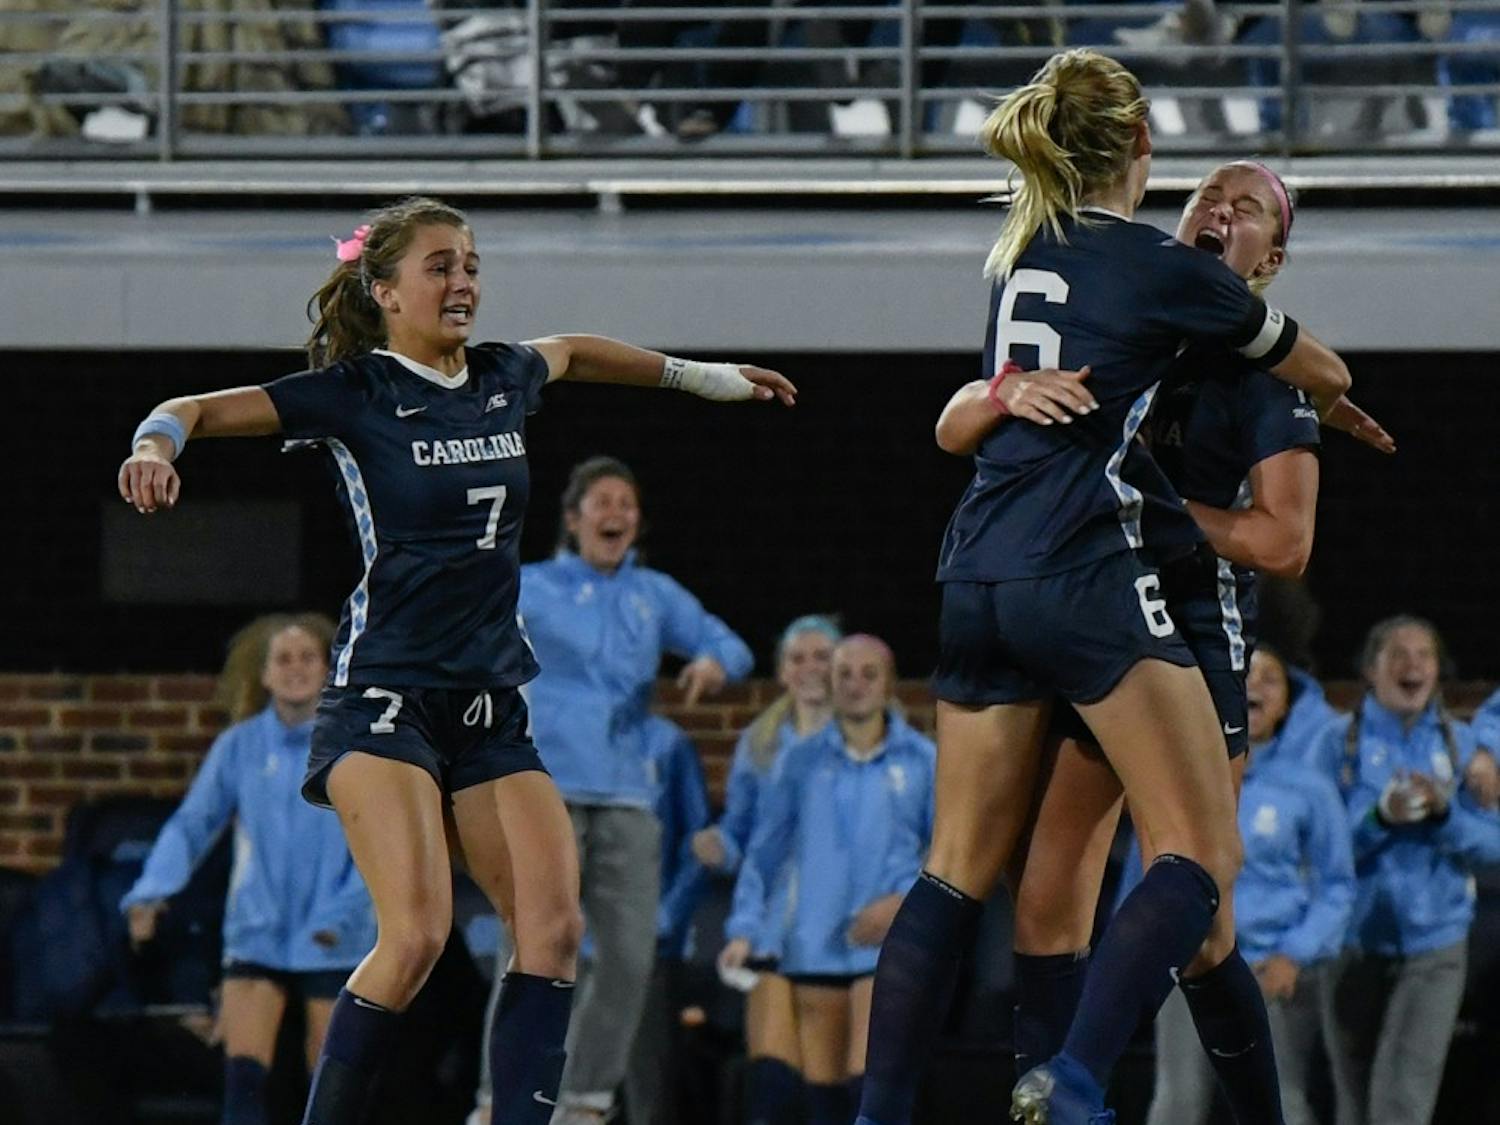 Taylor Otto (6) and Julia Dorsey (7) celebrate Alessia Russo's (19) goal that  led to North Carolina defeating Colorado 1-0 at Dorrance Field in the second round of the NCAA Women's soccer tournament.